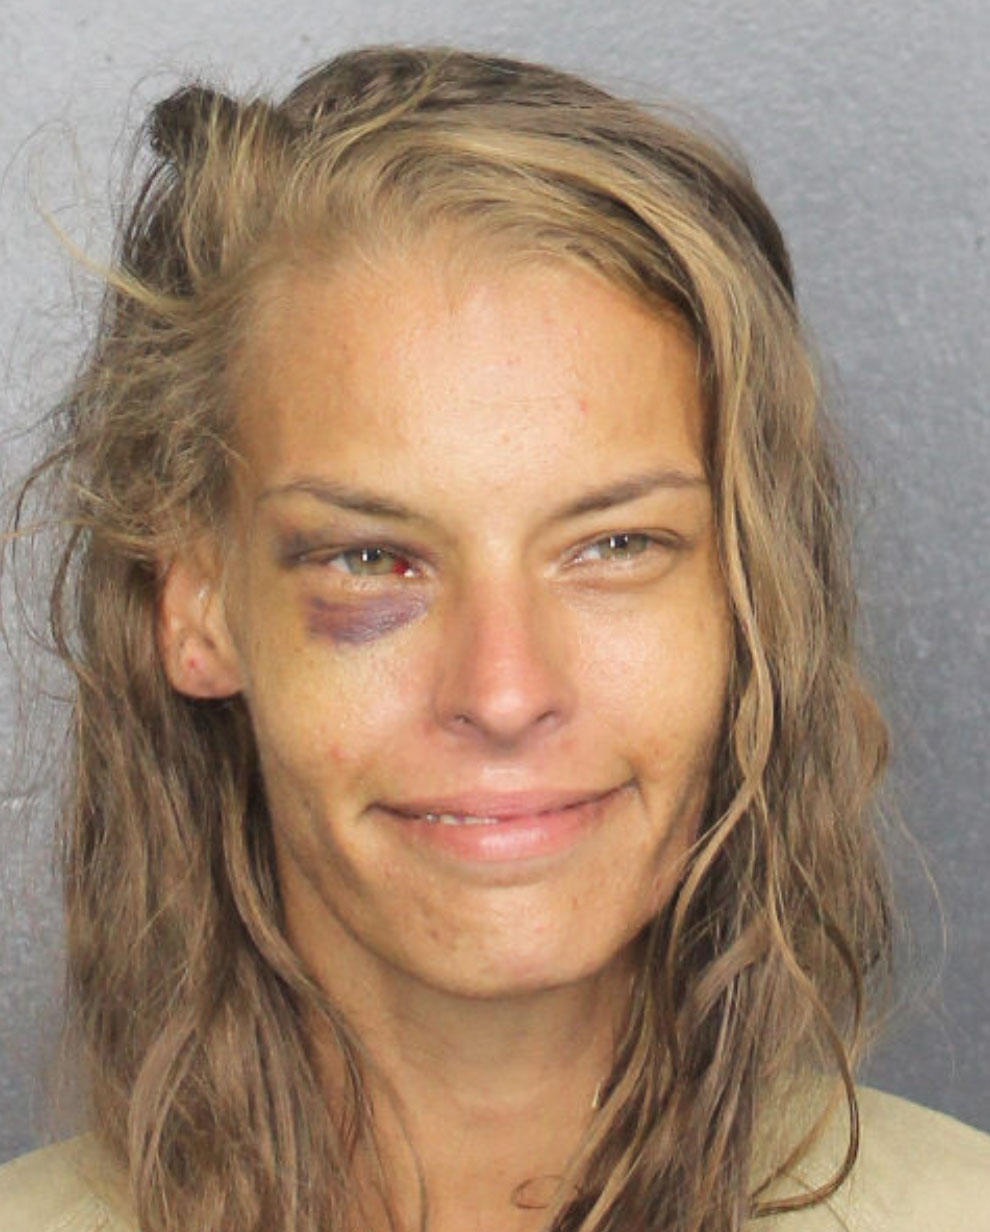 Arrested for Grand theft auto coral springs